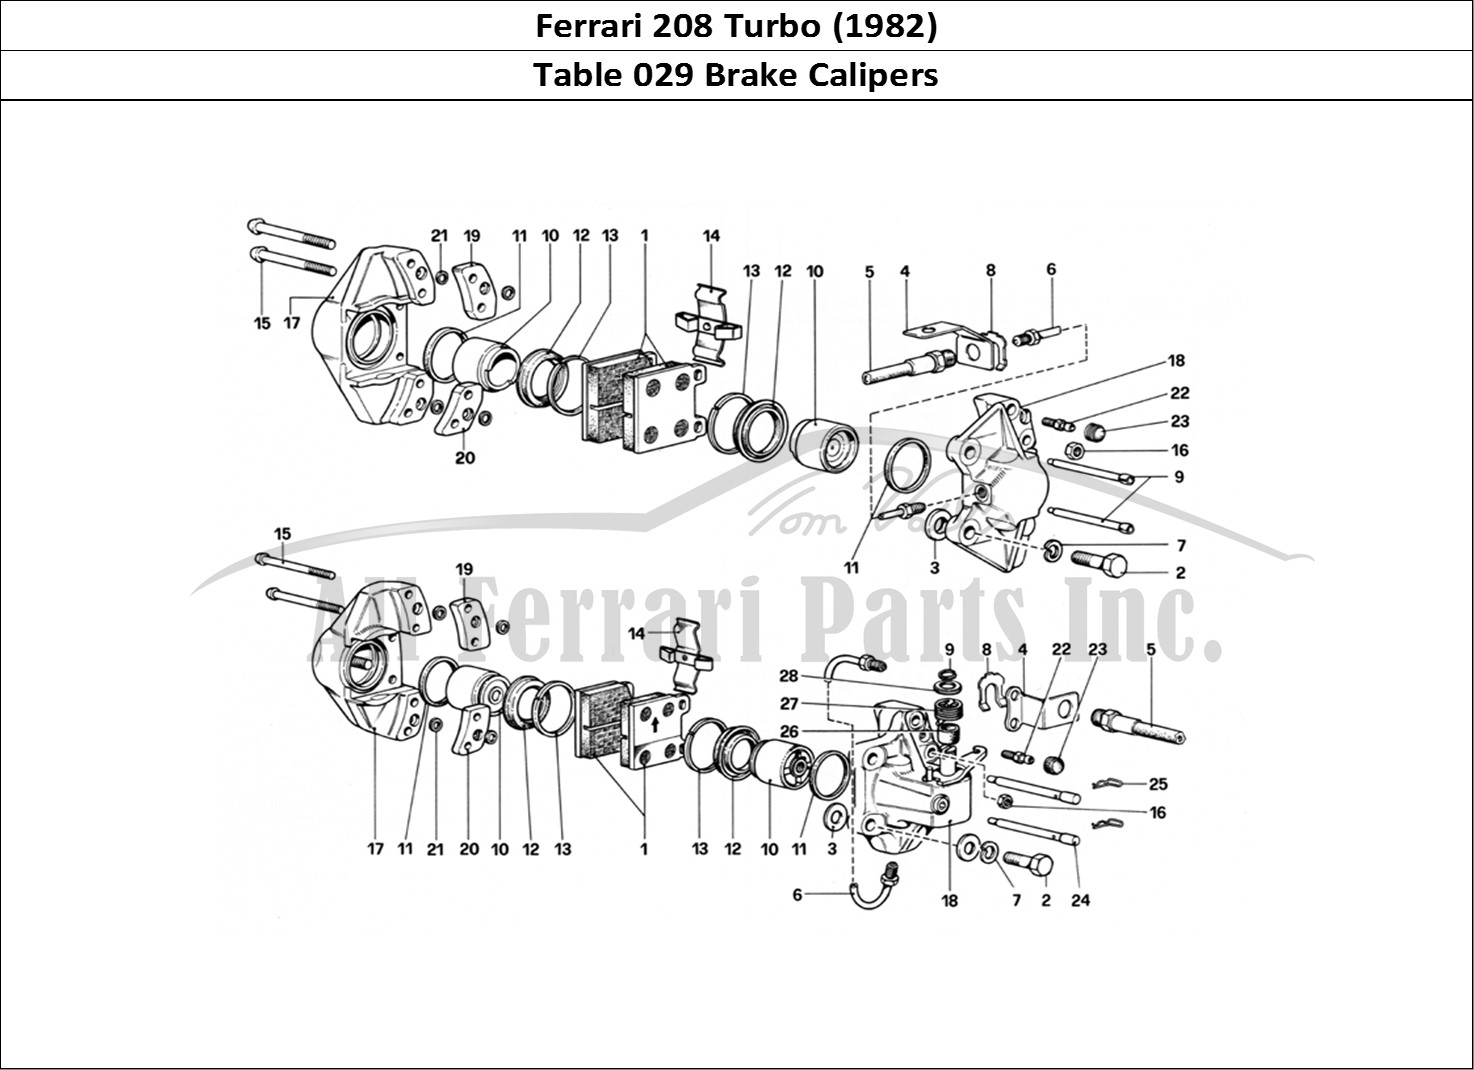 Ferrari Parts Ferrari 208 Turbo (1982) Page 029 Calipers for Front and Re